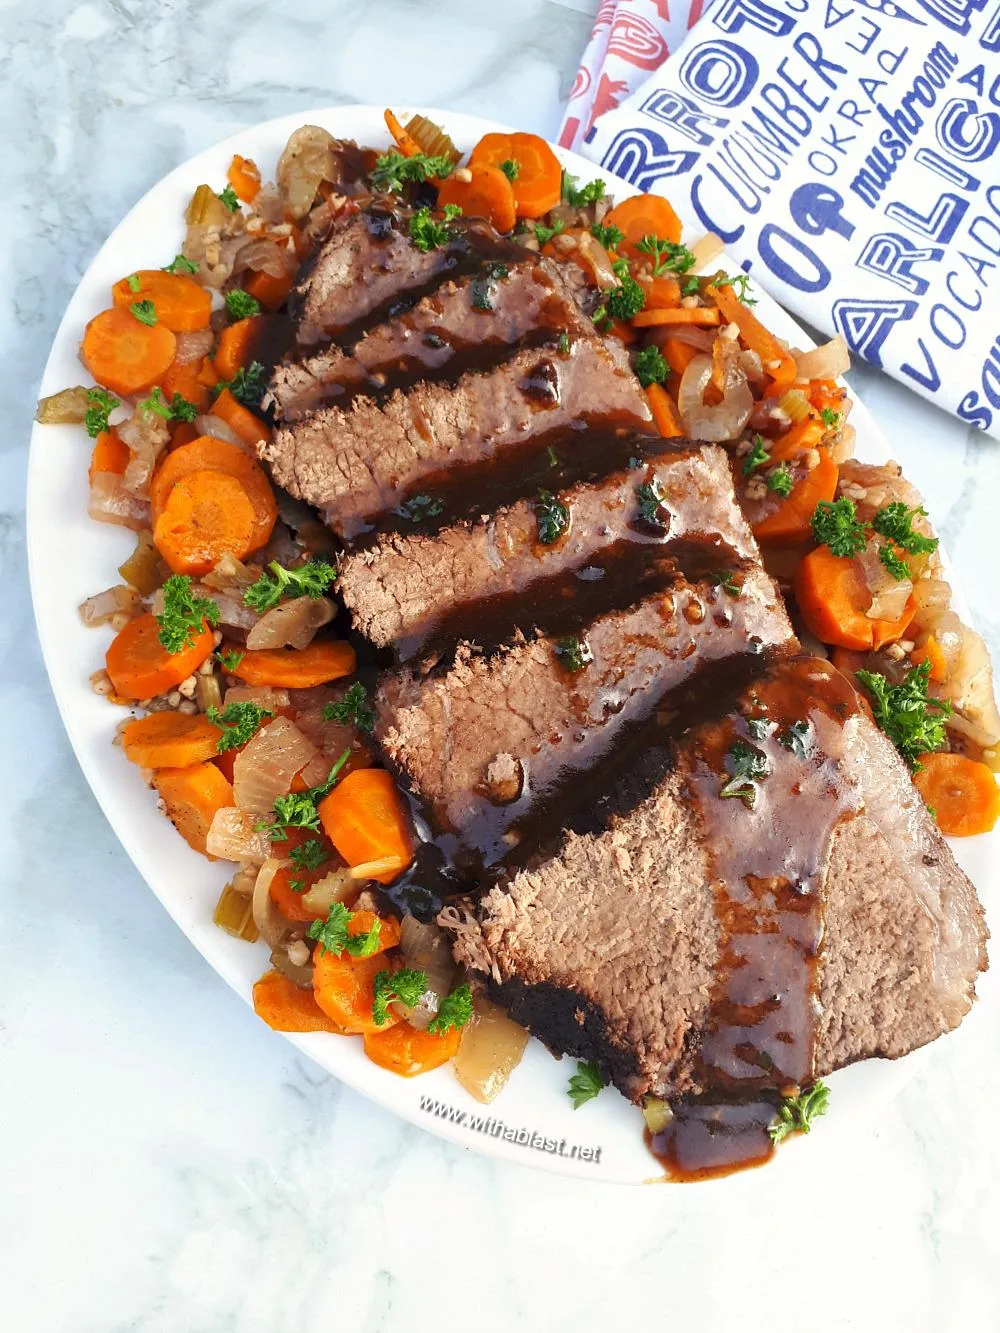 Best Slow-Cooker Pot Roast turns out so tender and juicy with vegetables all cooked in the slow-cooker - no fuss recipe and ideal for a Sunday roast !